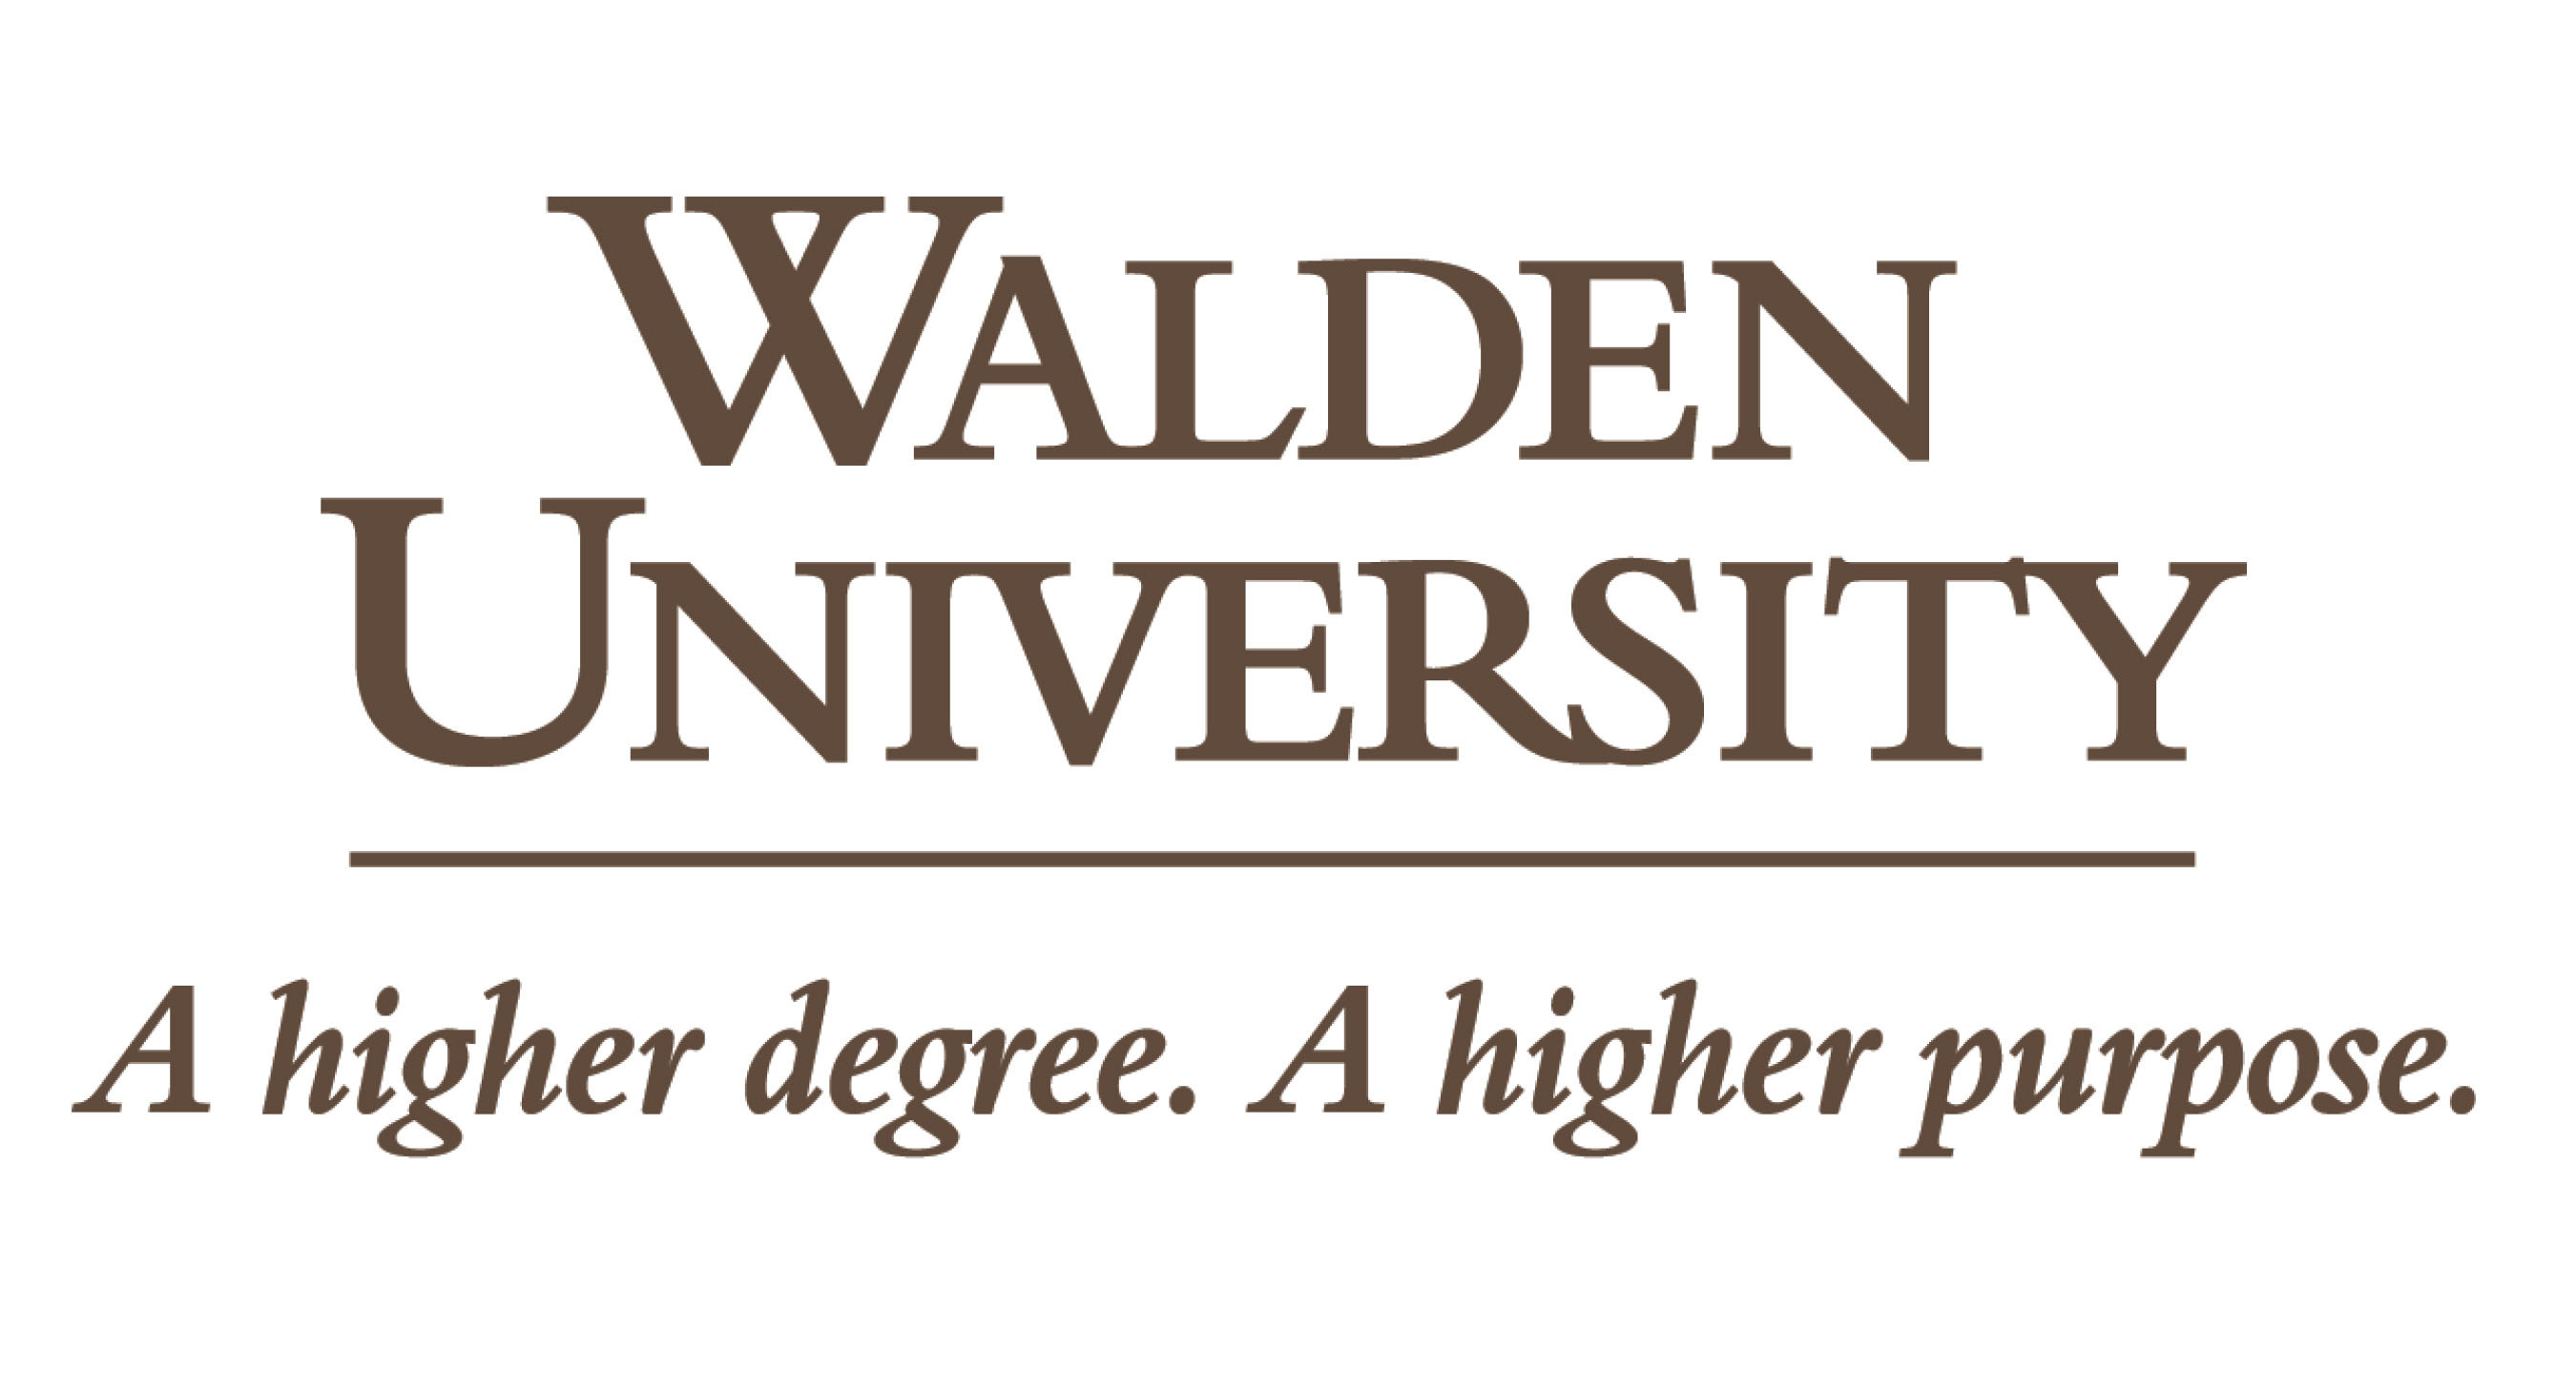 Walden University - Psychology and Counseling, Accreditation, Applying,  Tuition, Financial Aid